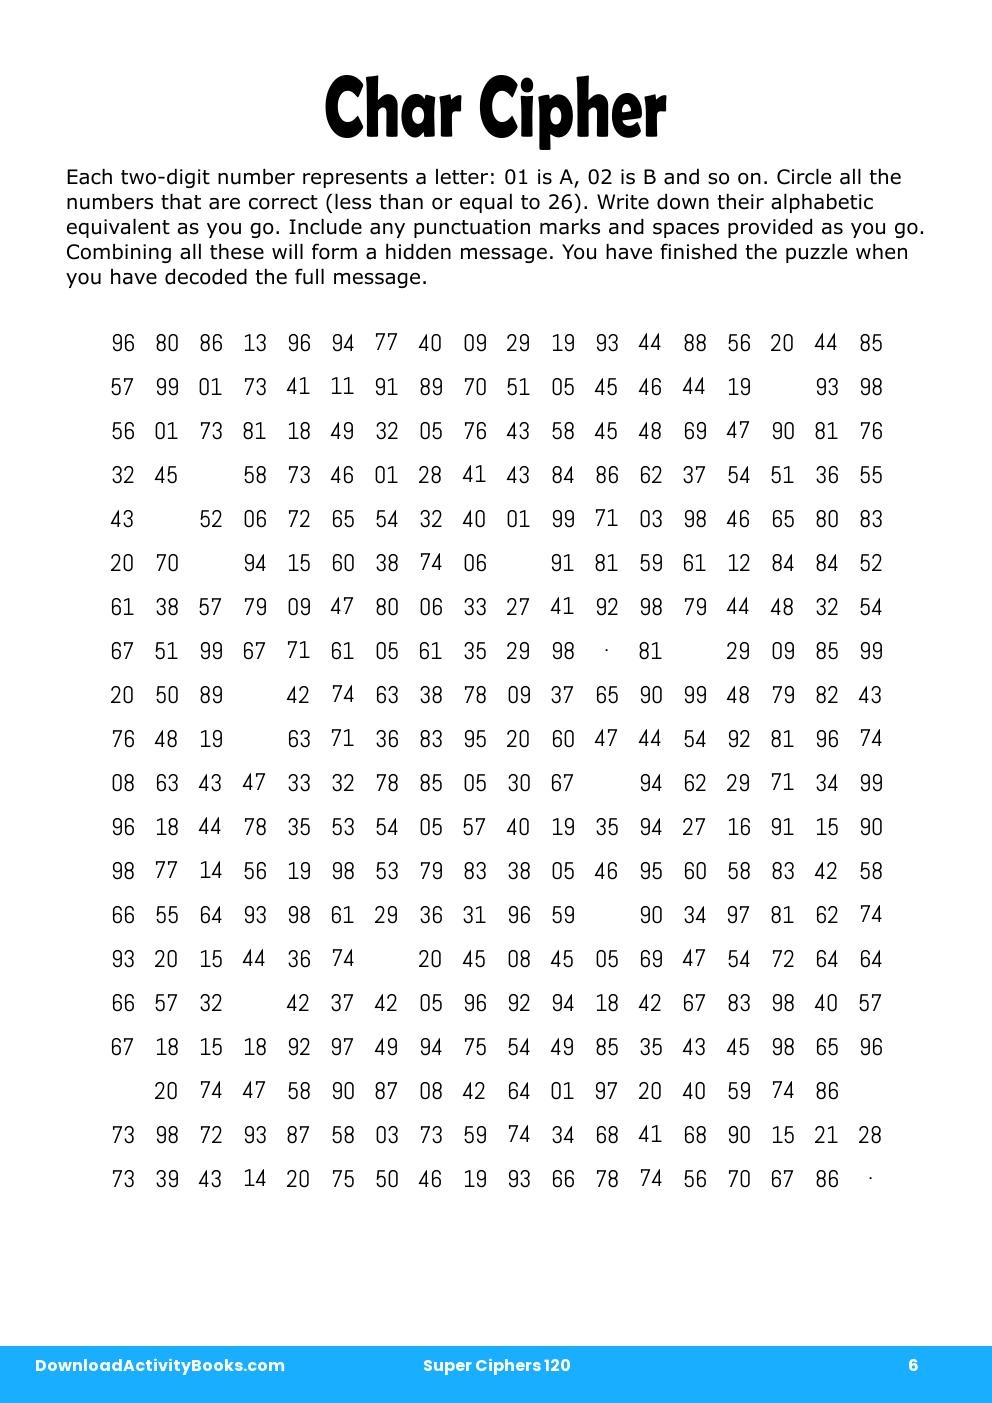 Char Cipher in Super Ciphers 120